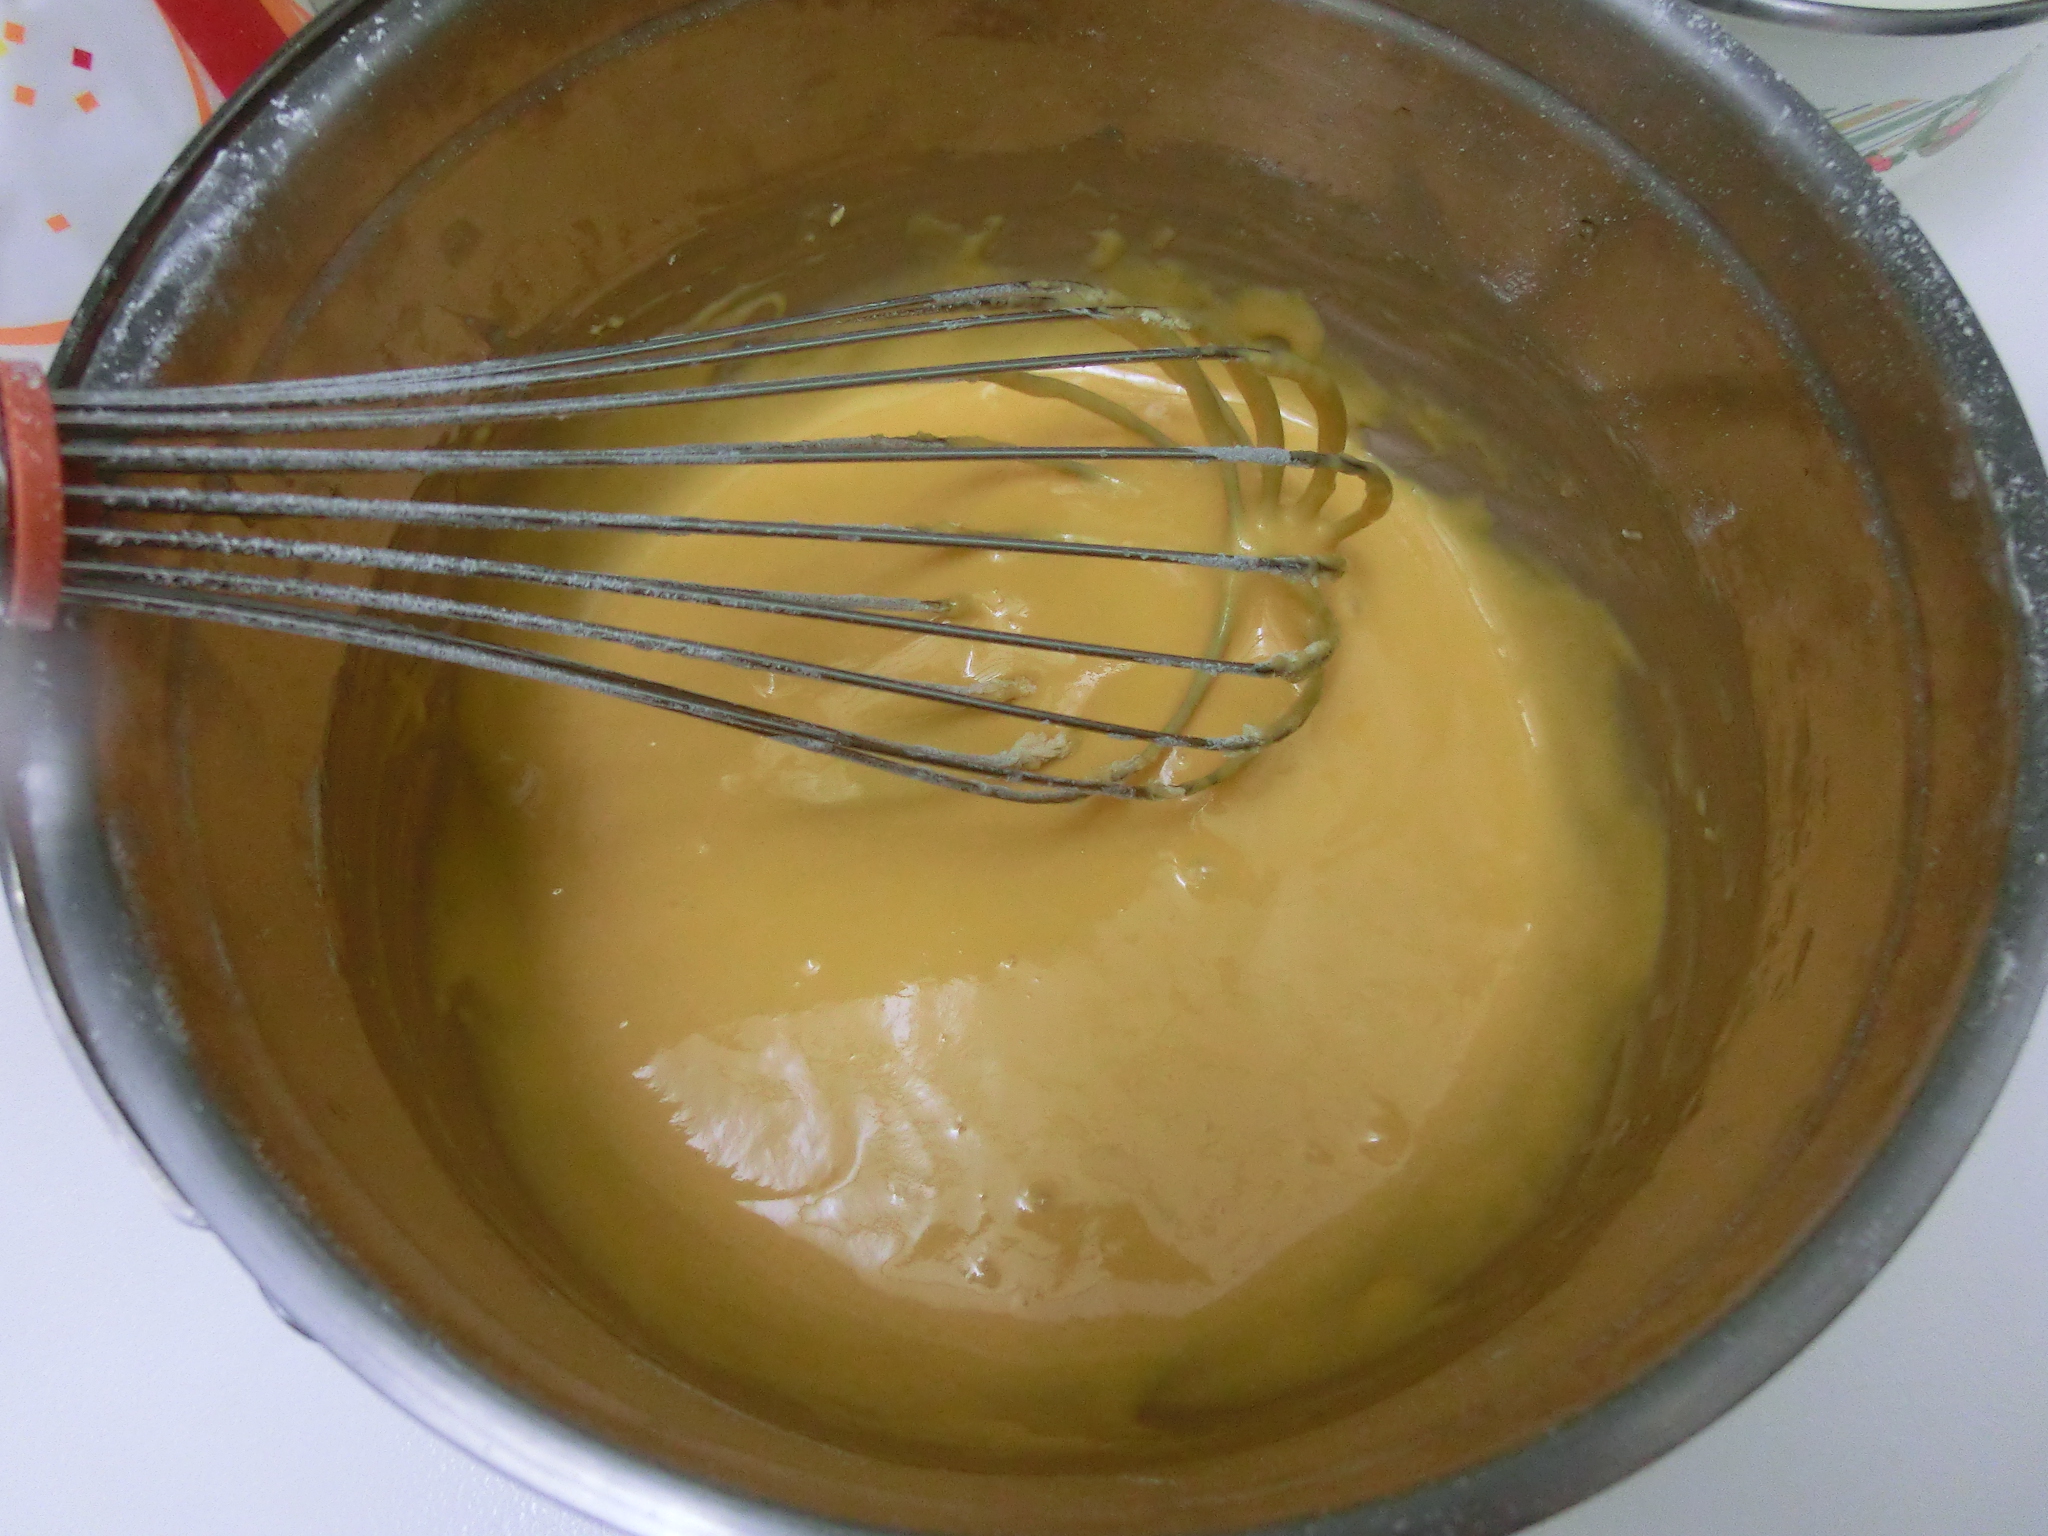 the mixing bowl has been whisked and is full of liquid